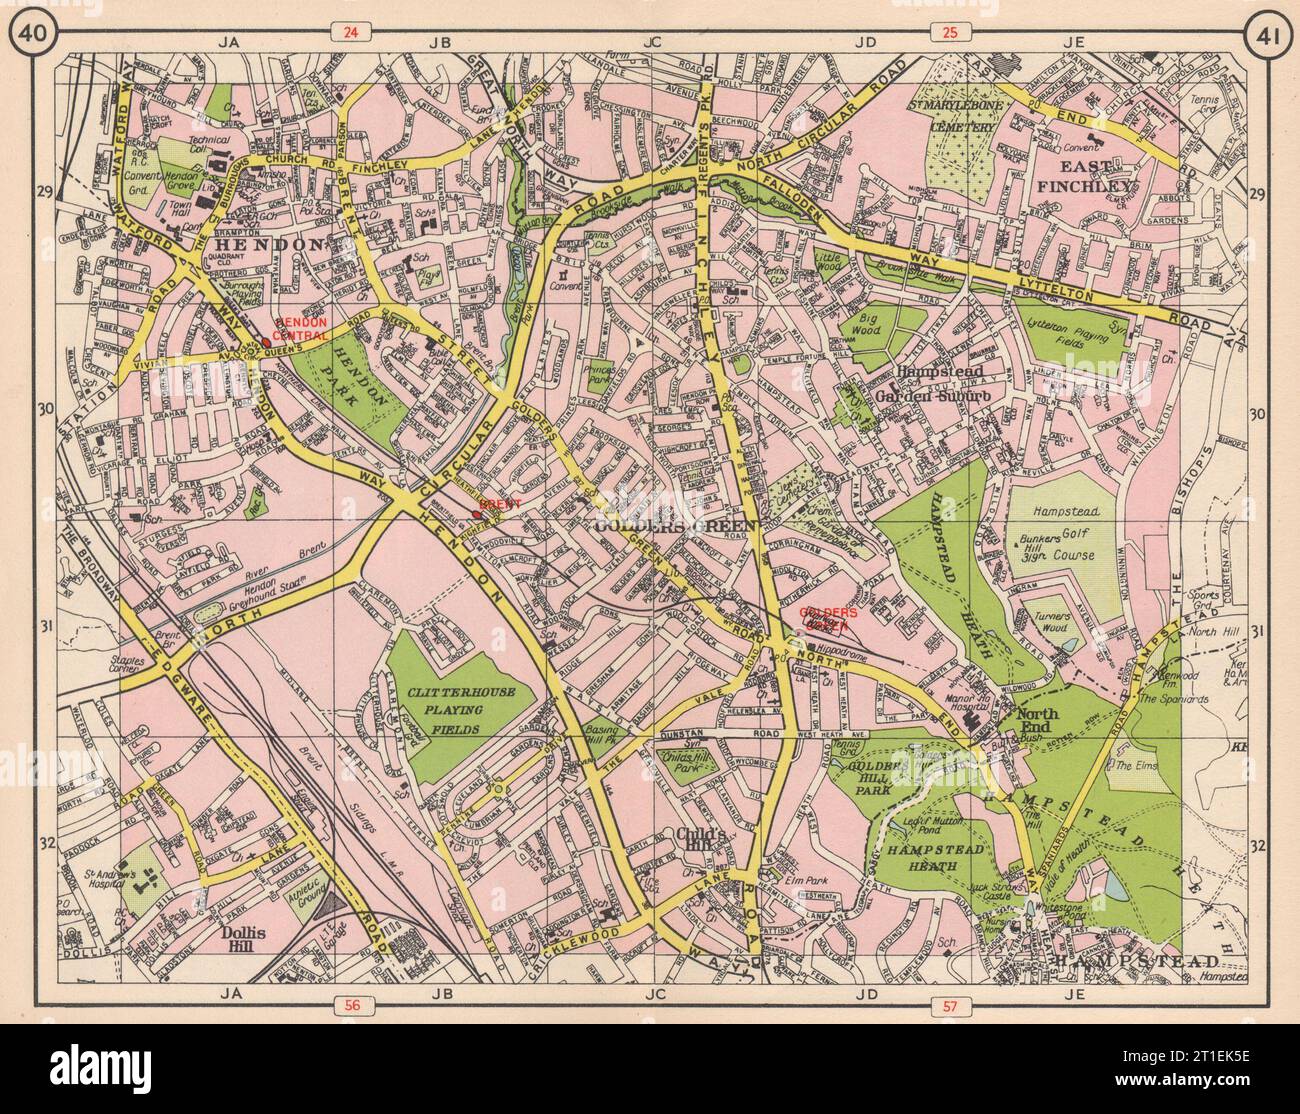 NW LONDON. Hendon East Finchley Golder's Green Child's Hill North End 1953 map Stock Photo